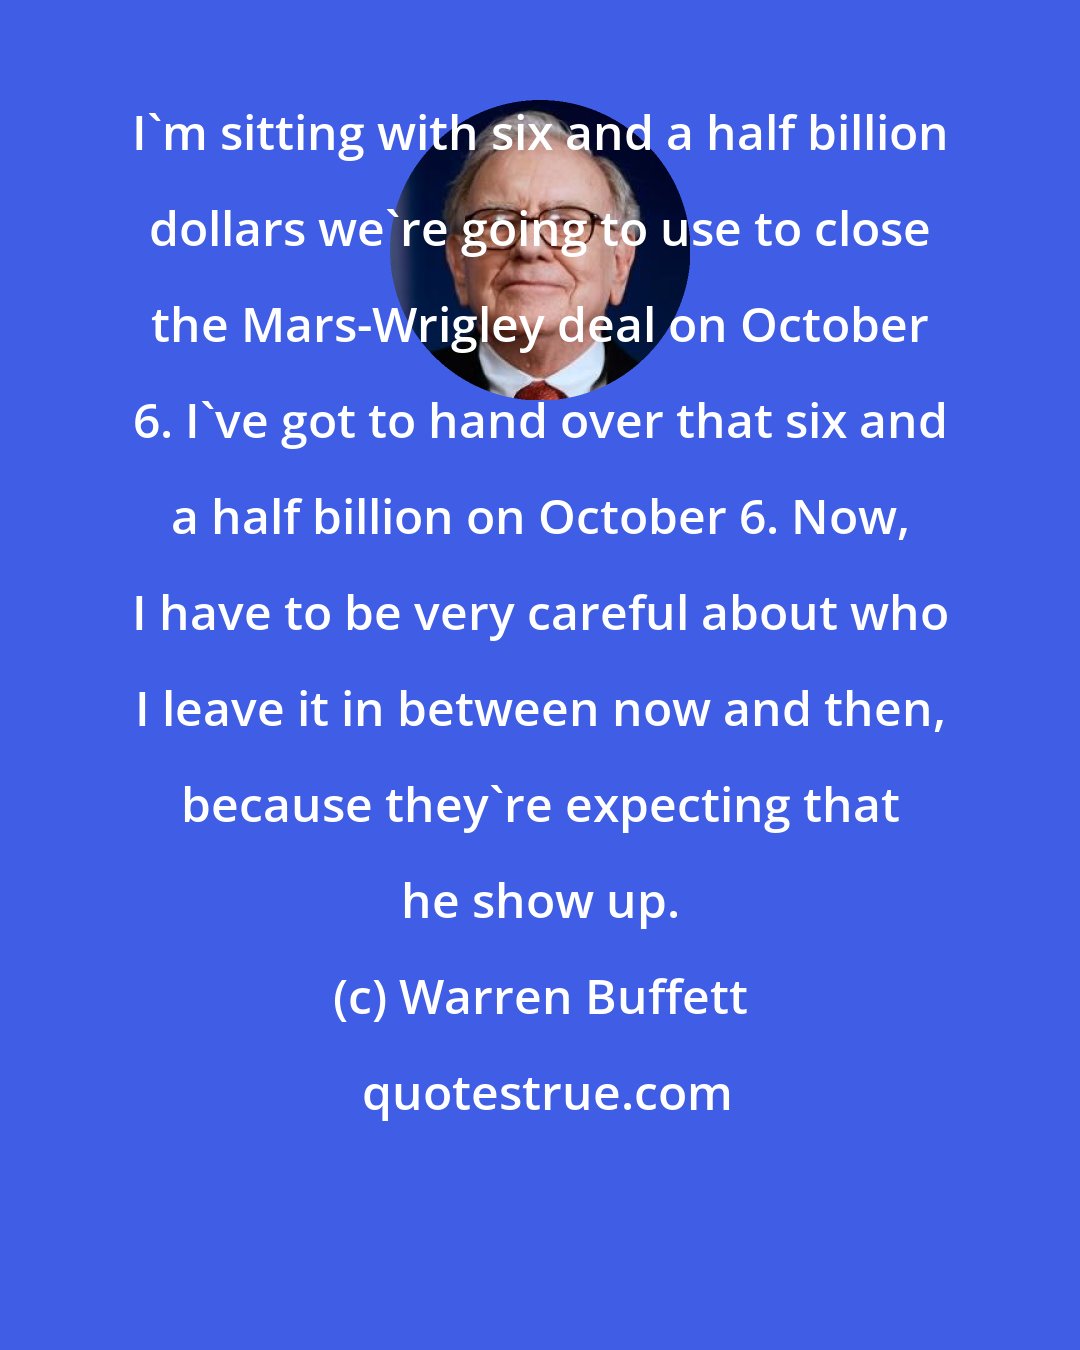 Warren Buffett: I'm sitting with six and a half billion dollars we're going to use to close the Mars-Wrigley deal on October 6. I've got to hand over that six and a half billion on October 6. Now, I have to be very careful about who I leave it in between now and then, because they're expecting that he show up.